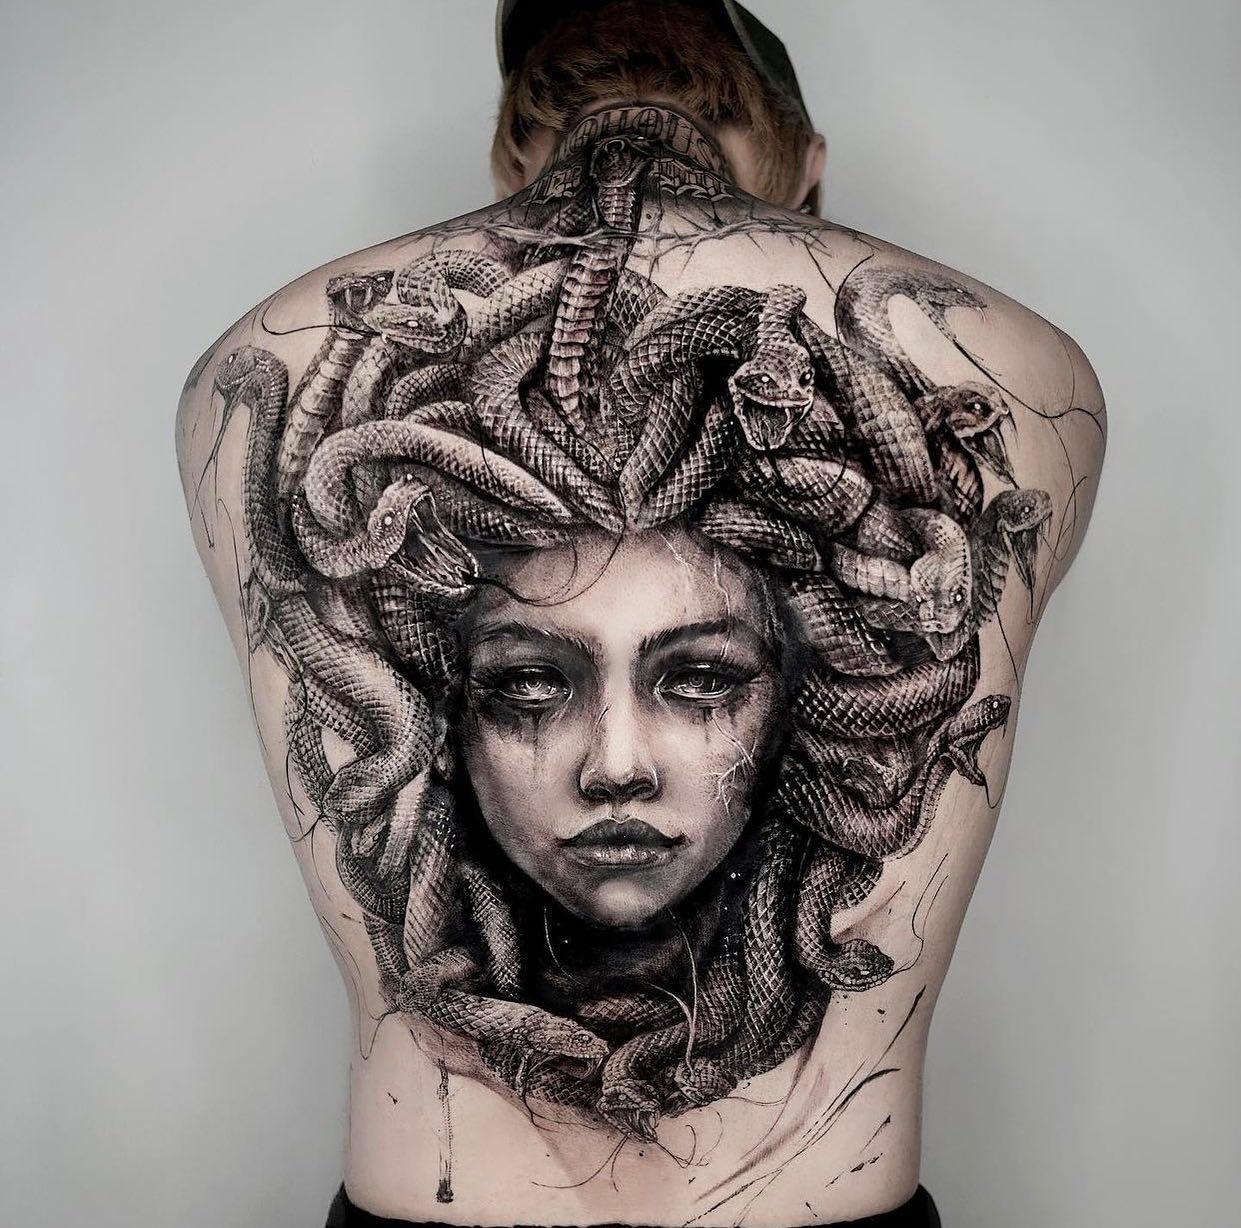 Here is a big-size tattoo to adore. Sometimes minimalist tattoos are not enough to show your tattoo to everyone. So, why don't you try to cover up all of your back with Medusa? All of its shading and perfect details will remind you the power of women.